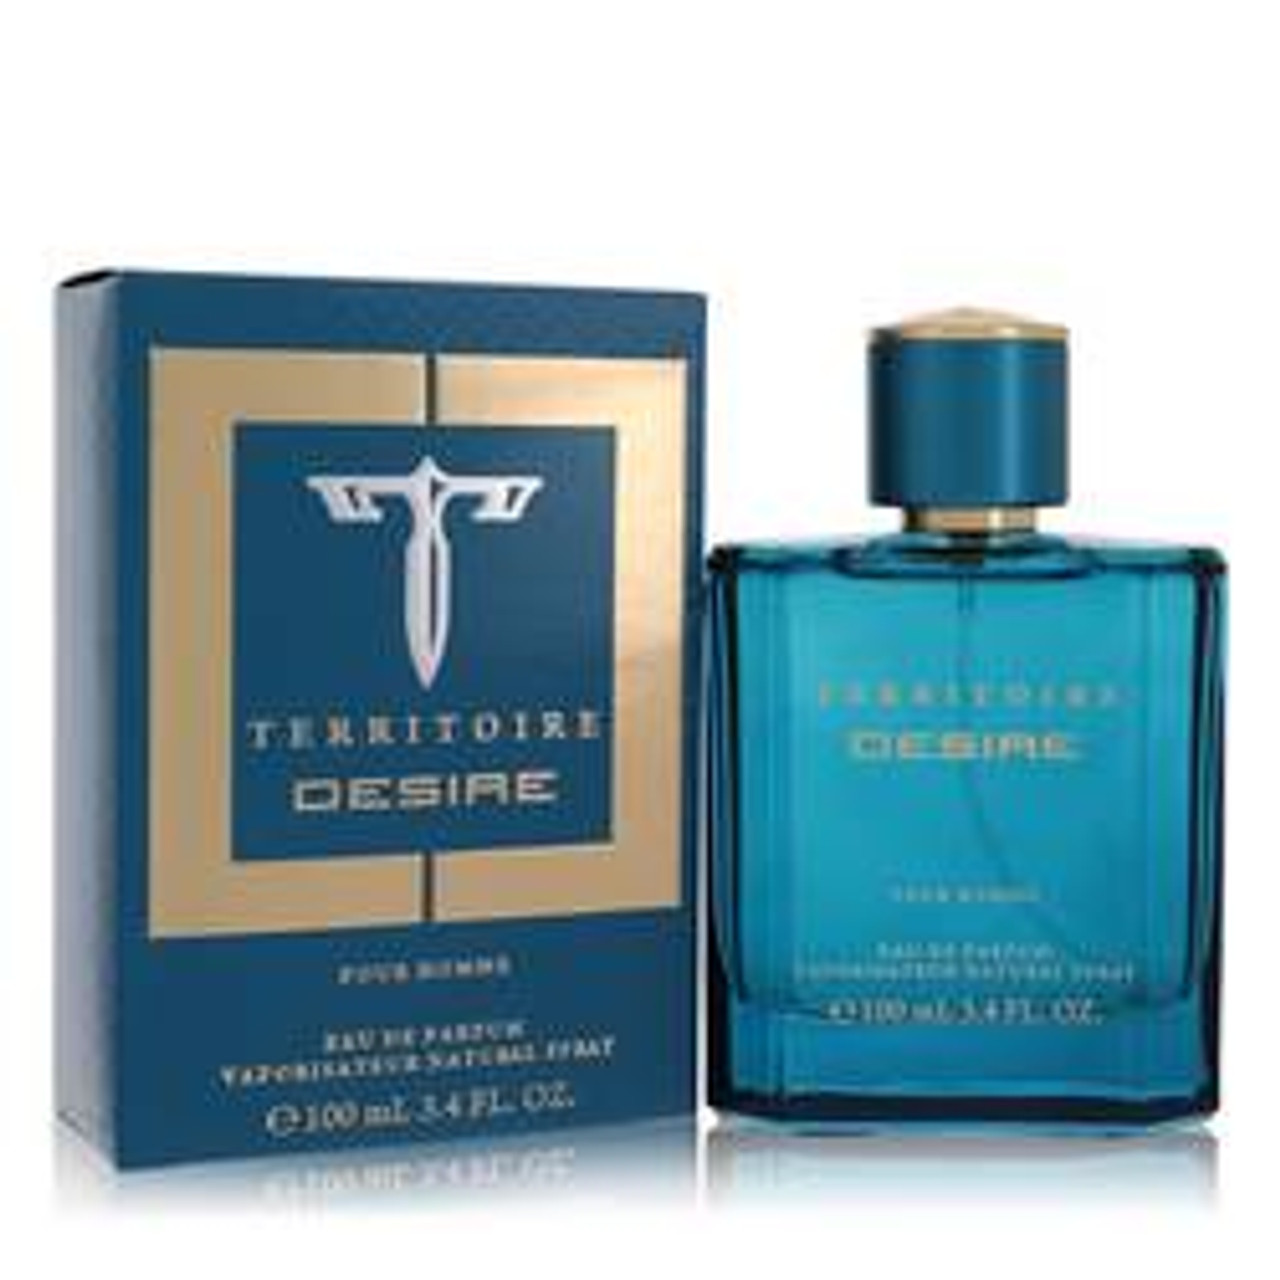 Territoire Desire Cologne By YZY Perfume Eau De Parfum Spray 3.4 oz for Men - [From 39.00 - Choose pk Qty ] - *Ships from Miami